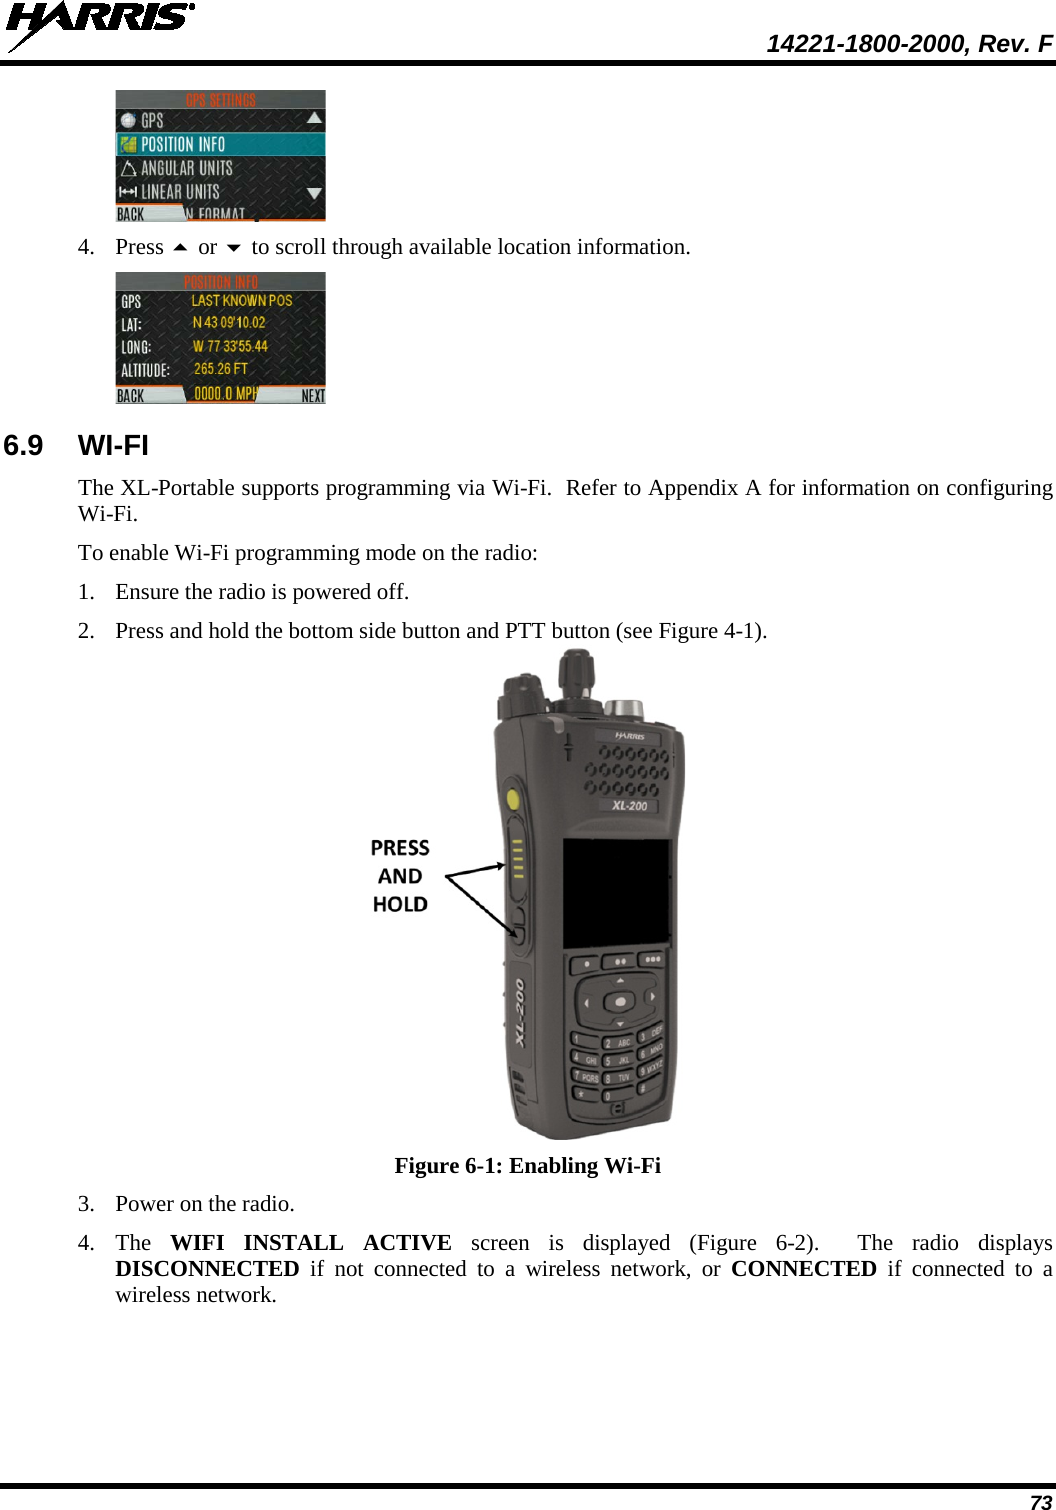  14221-1800-2000, Rev. F 73  4. Press  or  to scroll through available location information.  6.9 WI-FI  The XL-Portable supports programming via Wi-Fi.  Refer to Appendix A for information on configuring Wi-Fi. To enable Wi-Fi programming mode on the radio: 1. Ensure the radio is powered off. 2. Press and hold the bottom side button and PTT button (see Figure 4-1).  Figure 6-1: Enabling Wi-Fi 3. Power on the radio. 4. The  WIFI INSTALL ACTIVE screen is displayed (Figure  6-2).  The radio displays DISCONNECTED if not connected to a wireless network, or CONNECTED if connected to a wireless network. 